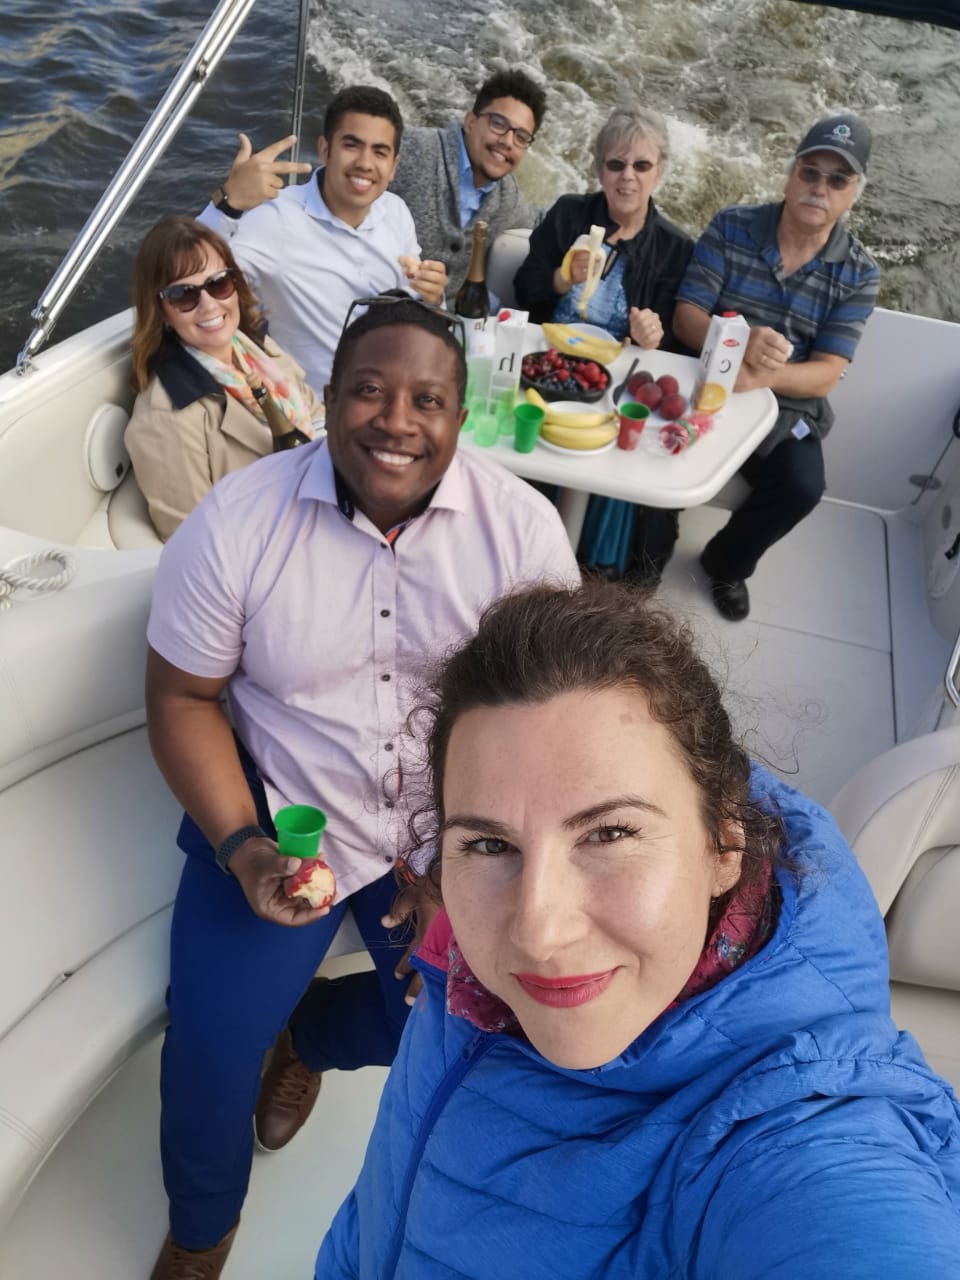 St Petersburg Russia tours: Marcus Owens party, St. Petersburg, June 30, 2019, the boat...